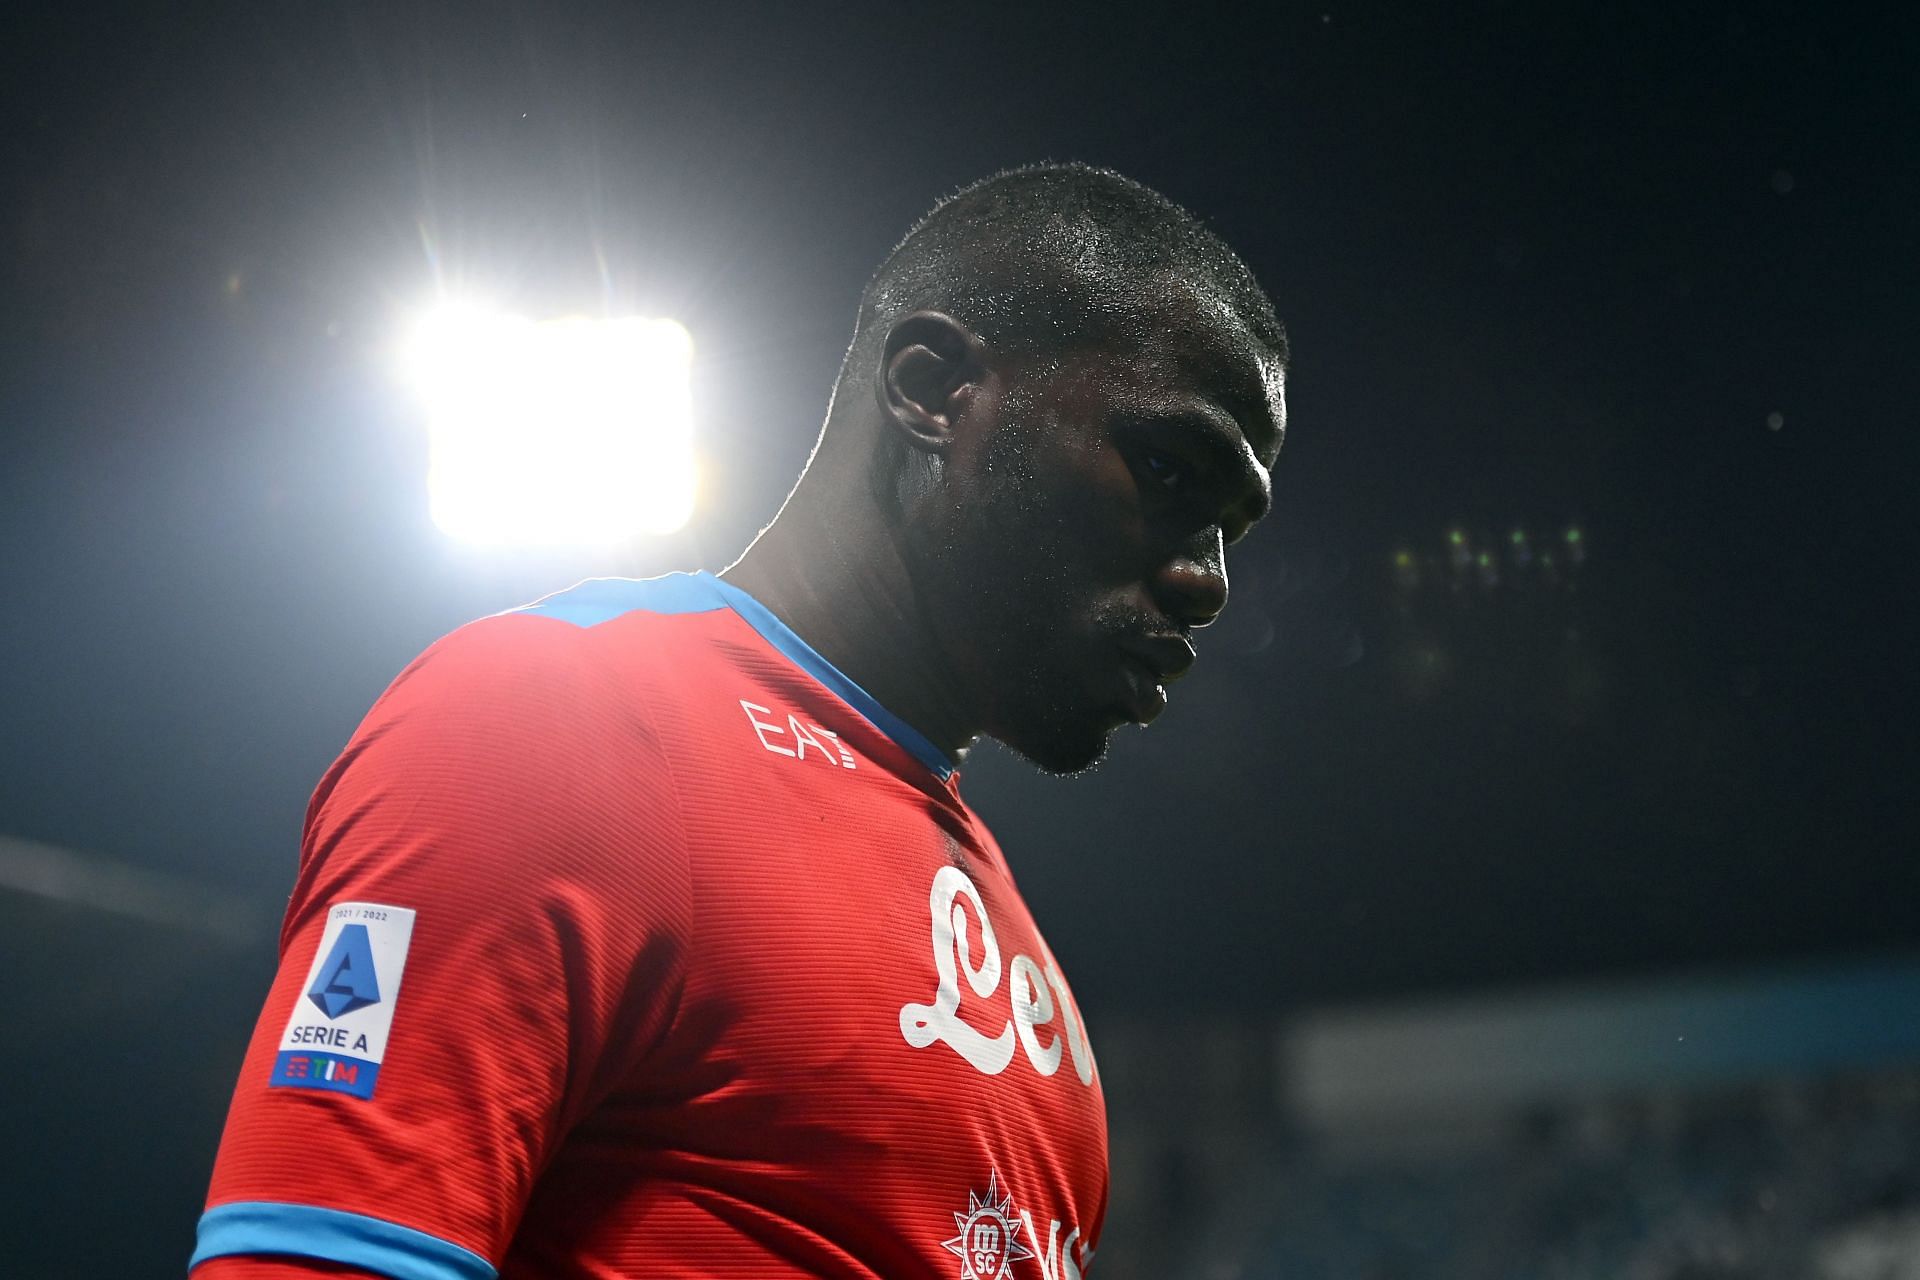 Kaludou Koulibaly is a long-term target for Manchester United.